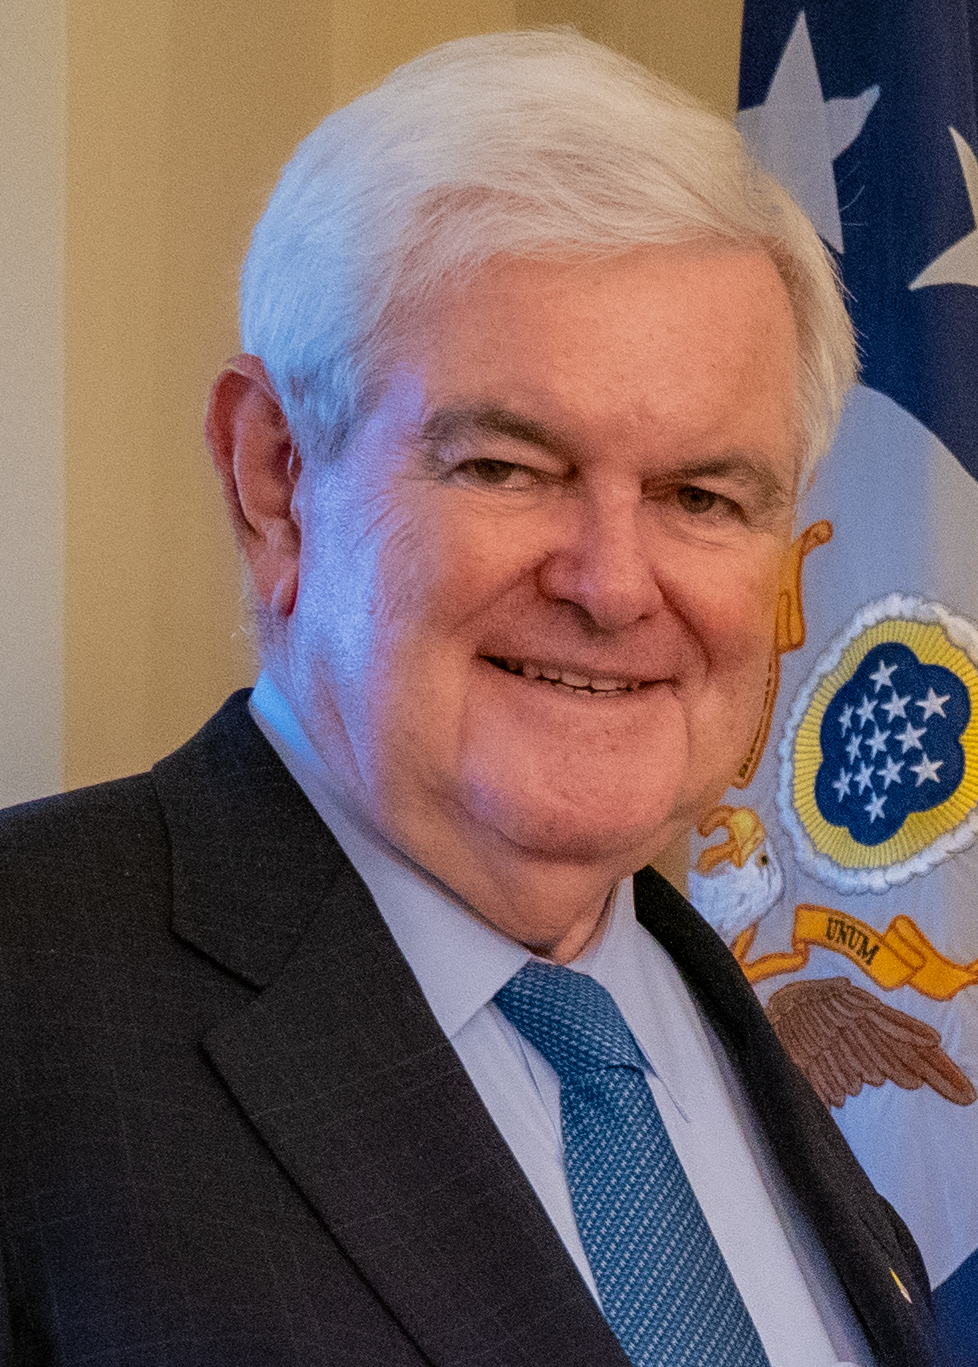 Newt Gingrich smiling